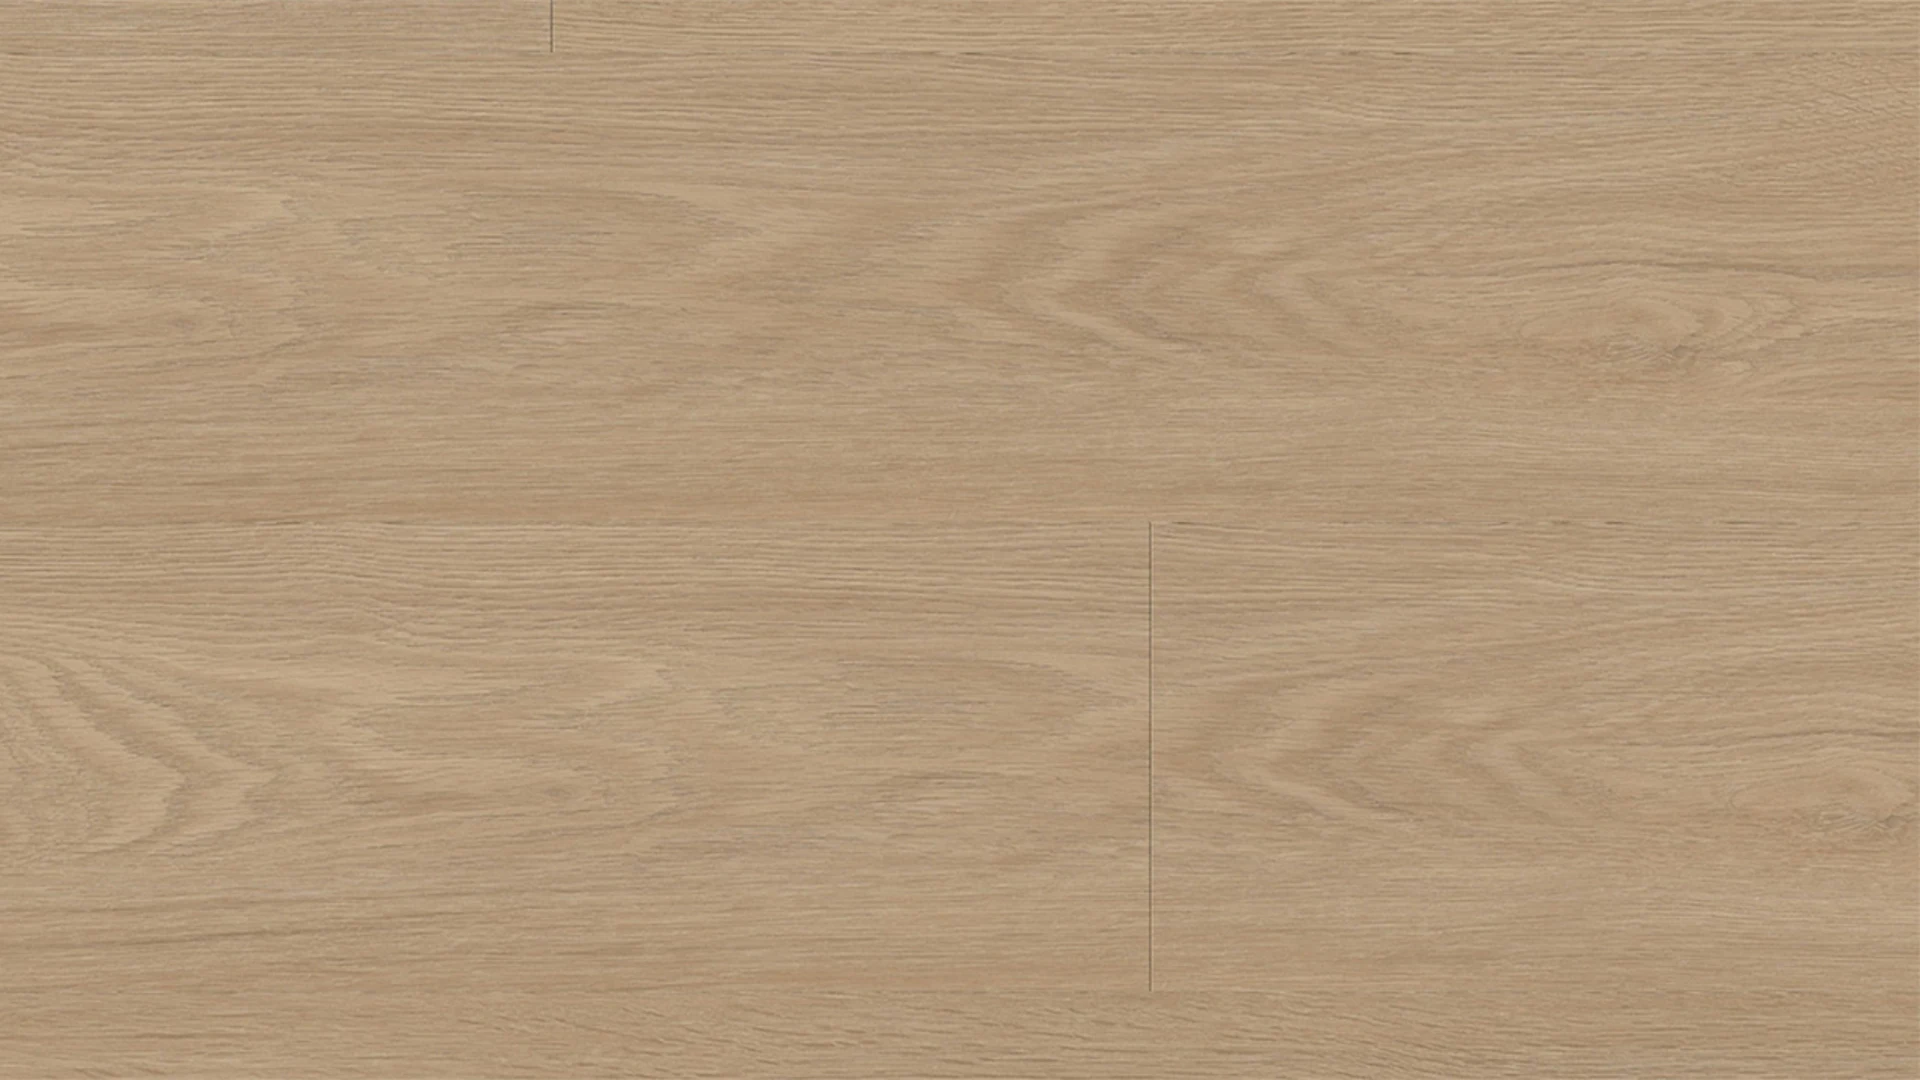 Gerflor click Vinyl - Virtuo 55 Rigid Acoustic EIR Blomma Natural | integrated impact sound insulation (39061465)